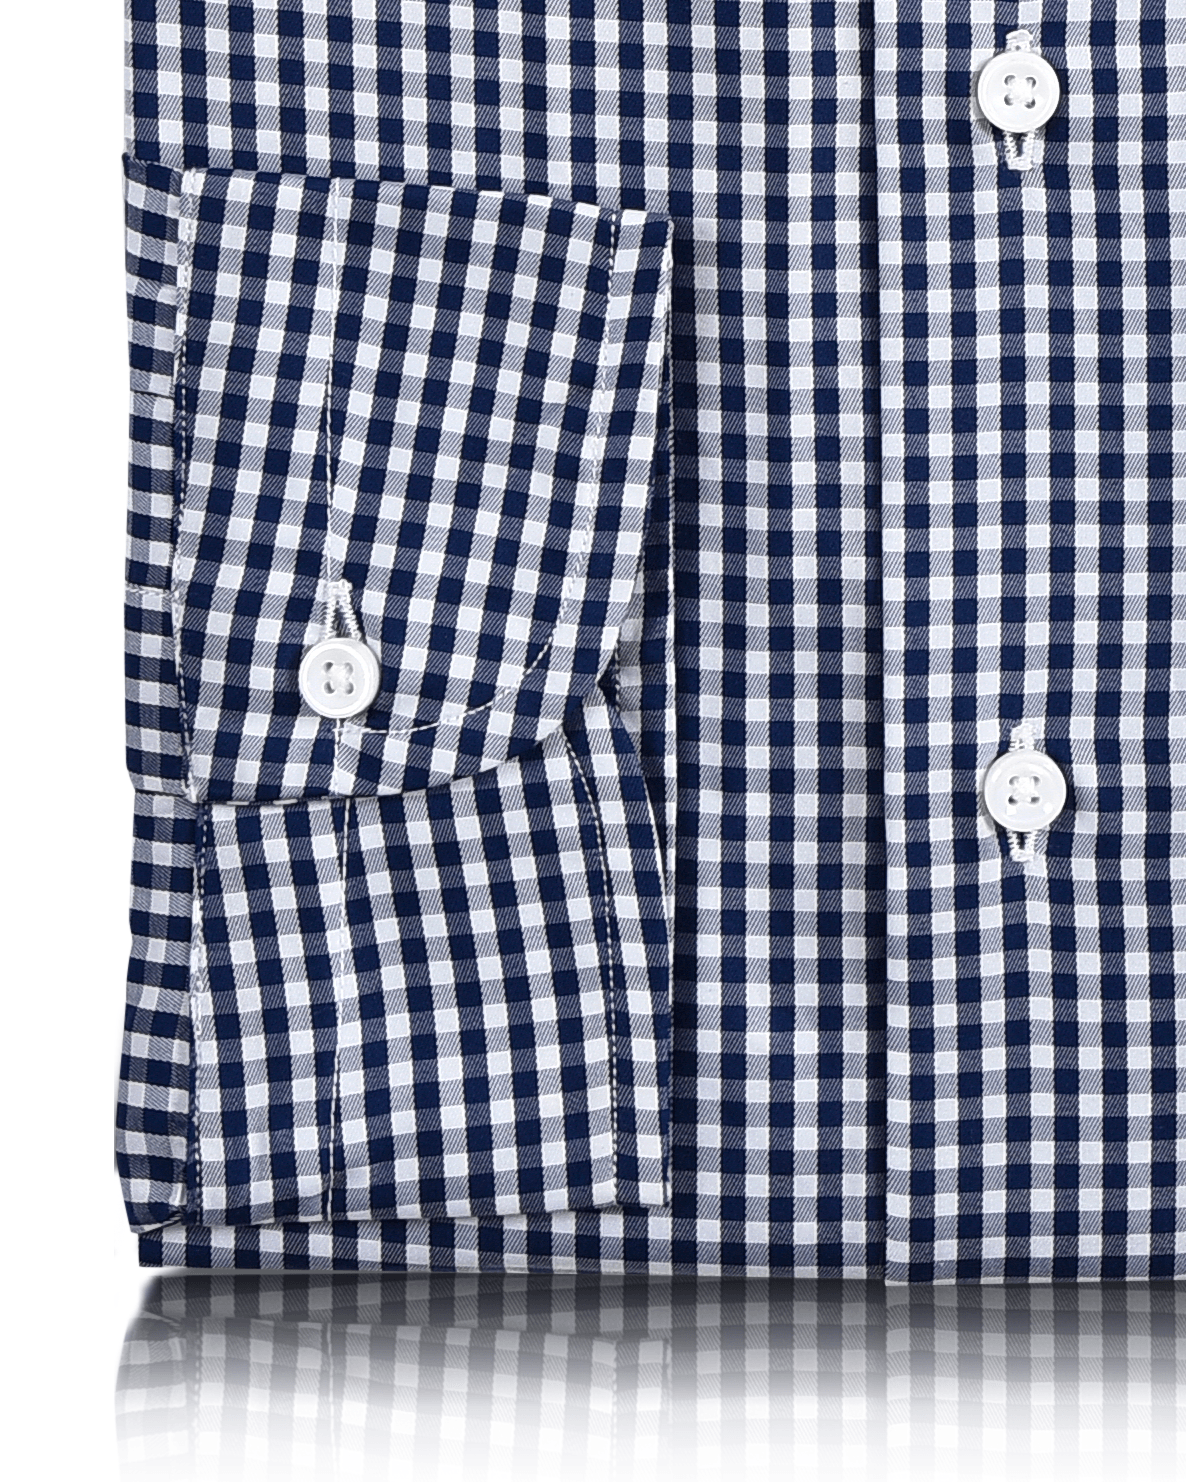 Close up view of custom check shirts for men by Luxire dark denim blue on white